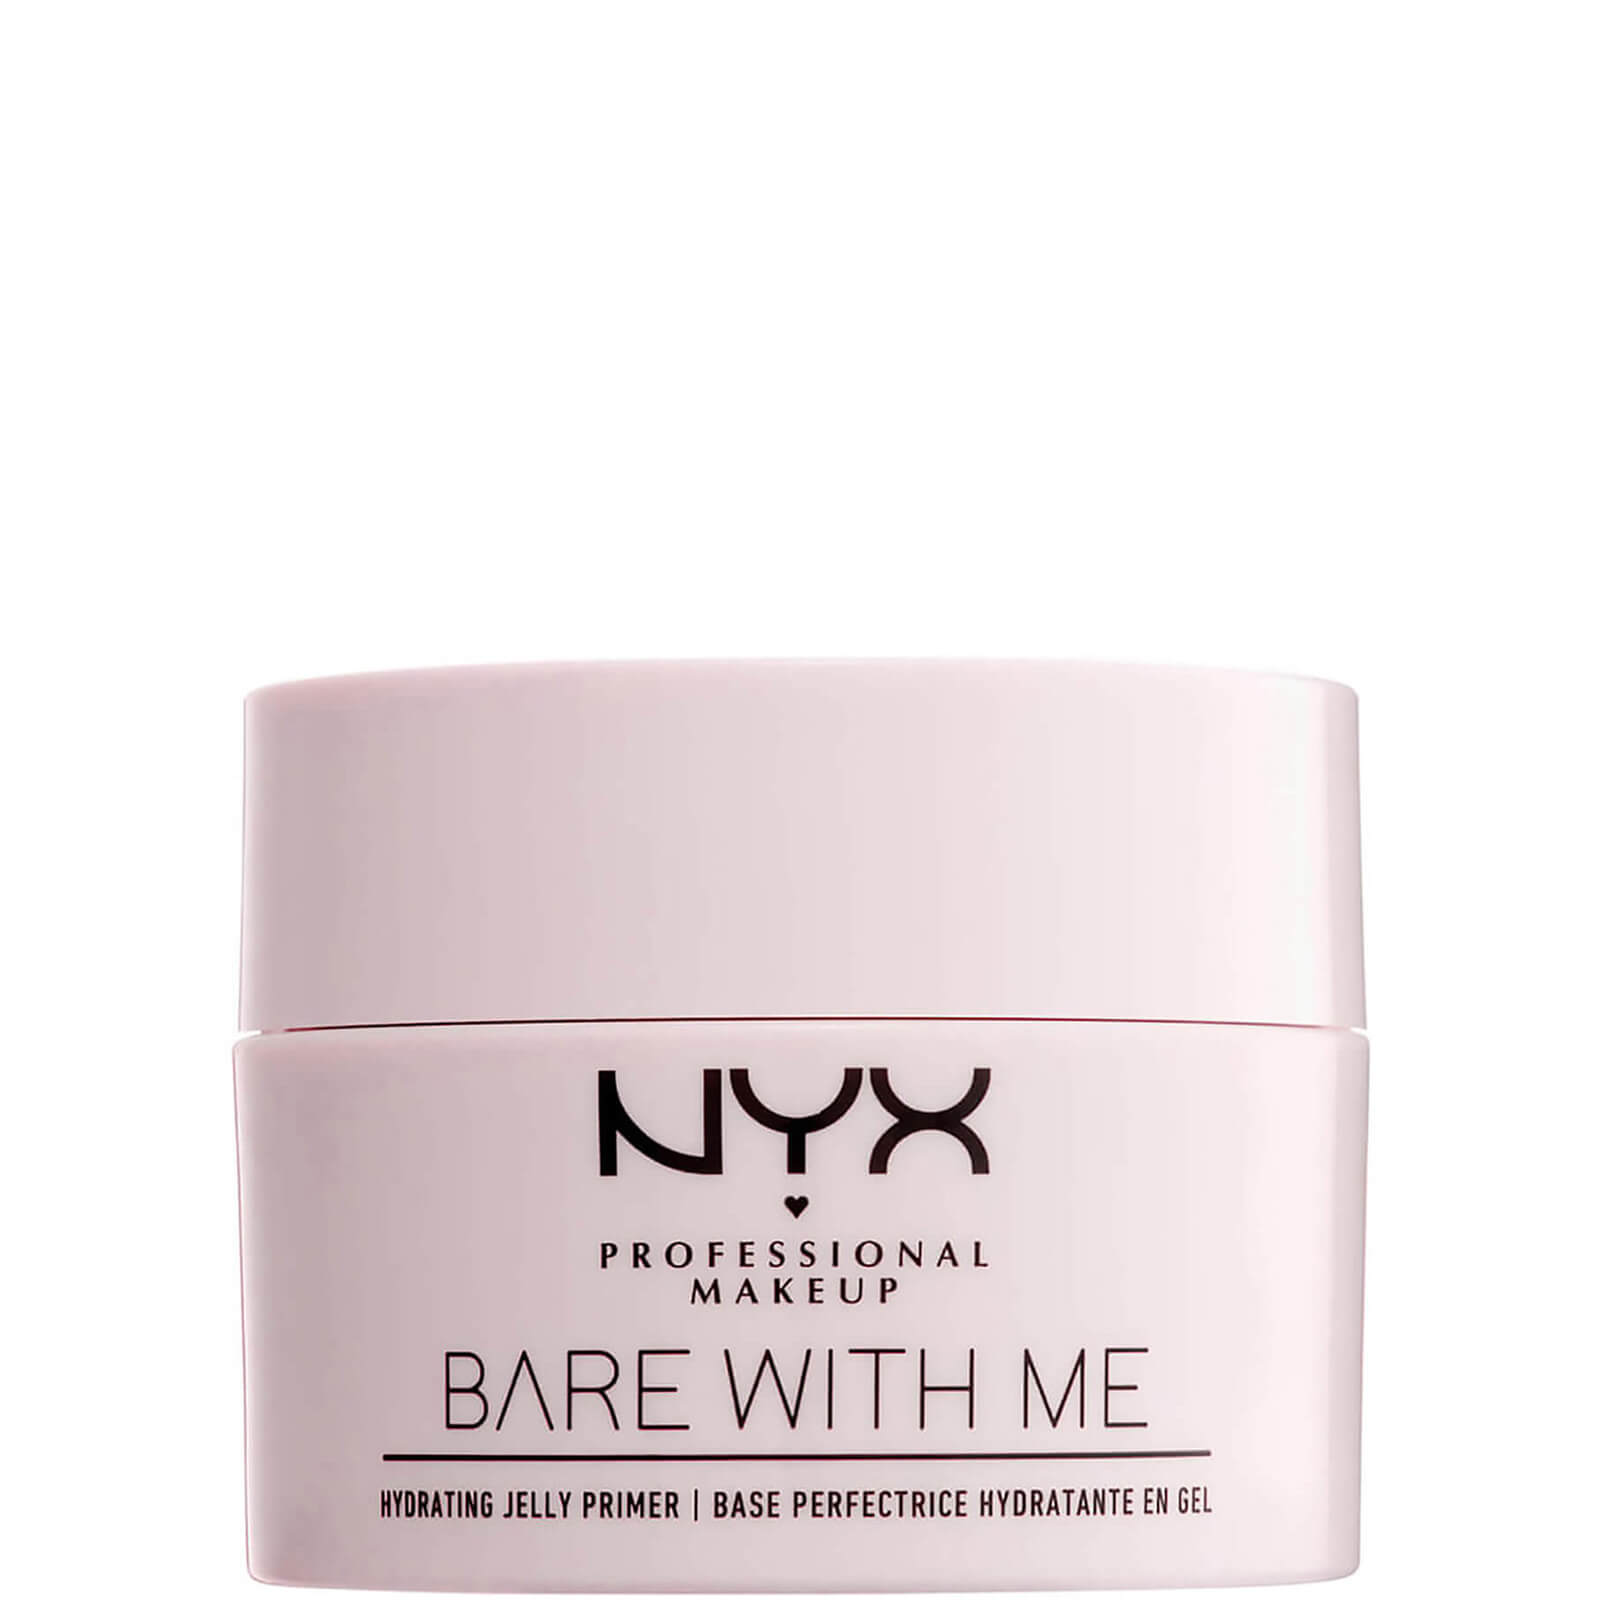 Image of NYX Professional Makeup Bare With Me Hydrating Jelly Primer 40g